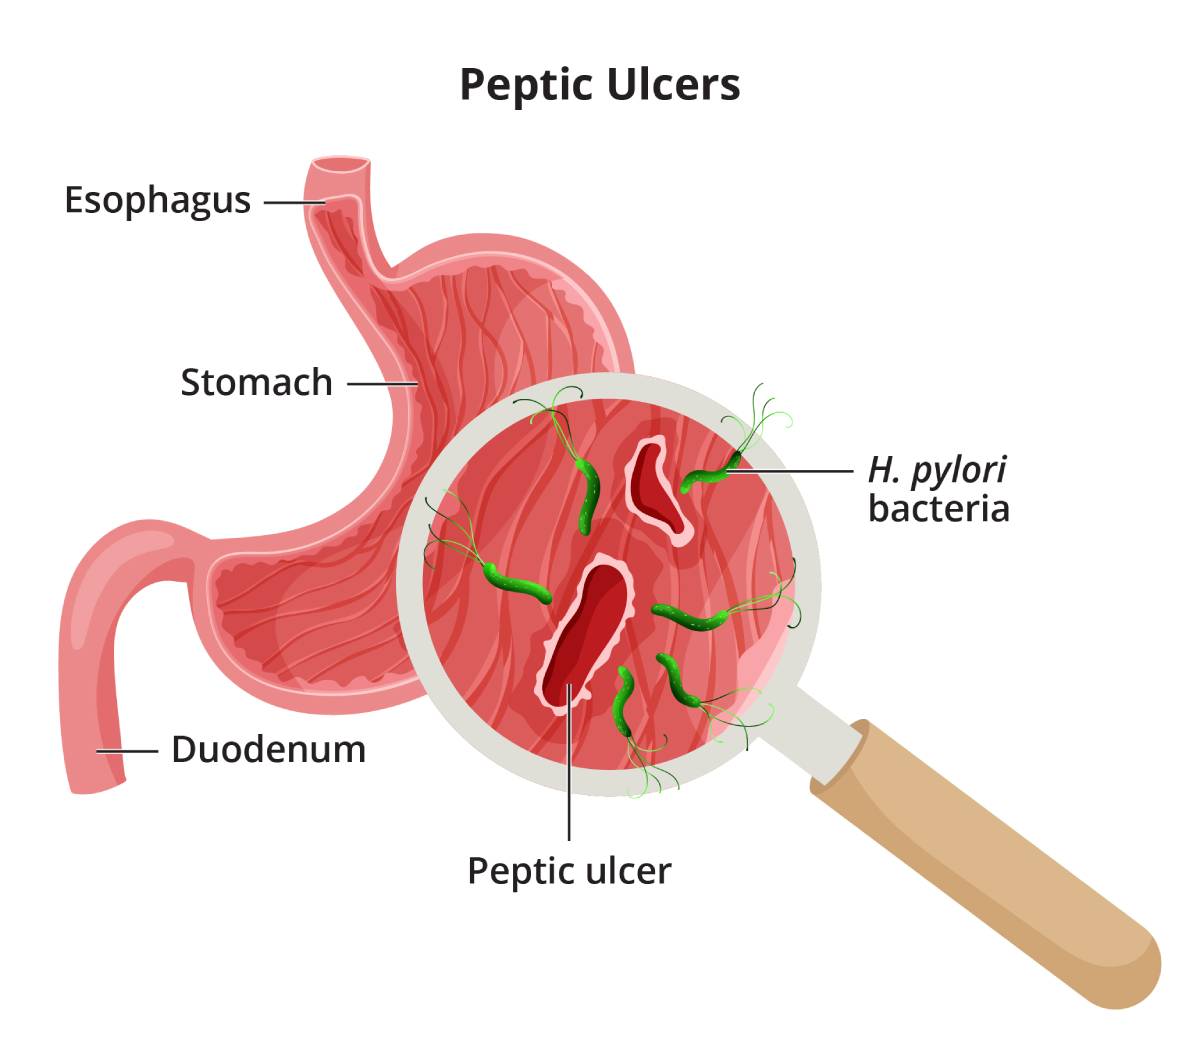 Peptic ulcers often develop due to bacteria infection